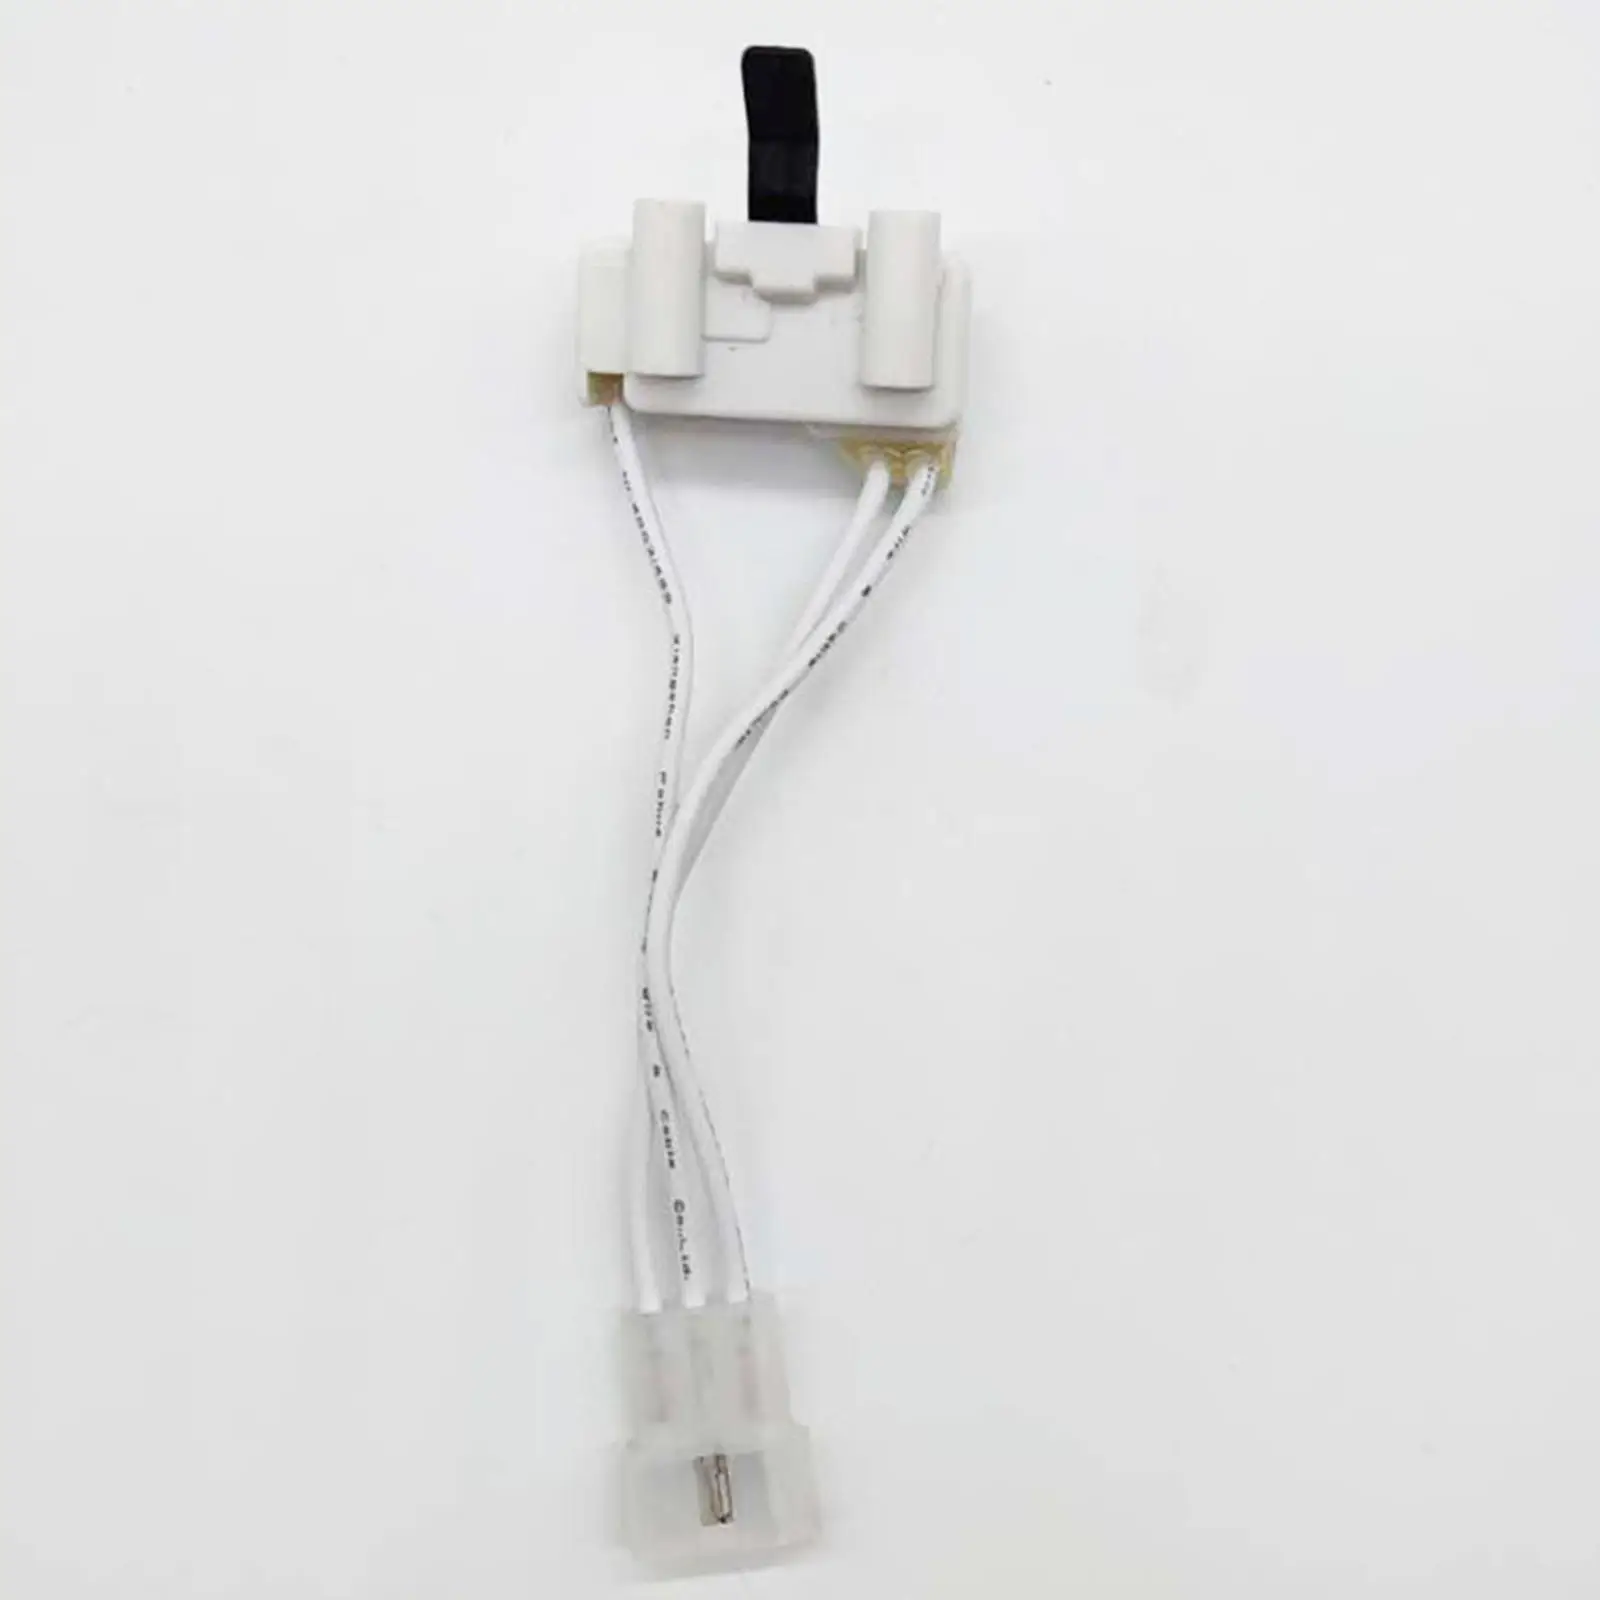 Door Switch Replacement Portable Accs Reusable Washing Machine Switch Accessory Dryer Door Switch for 3406107 Washing Machine